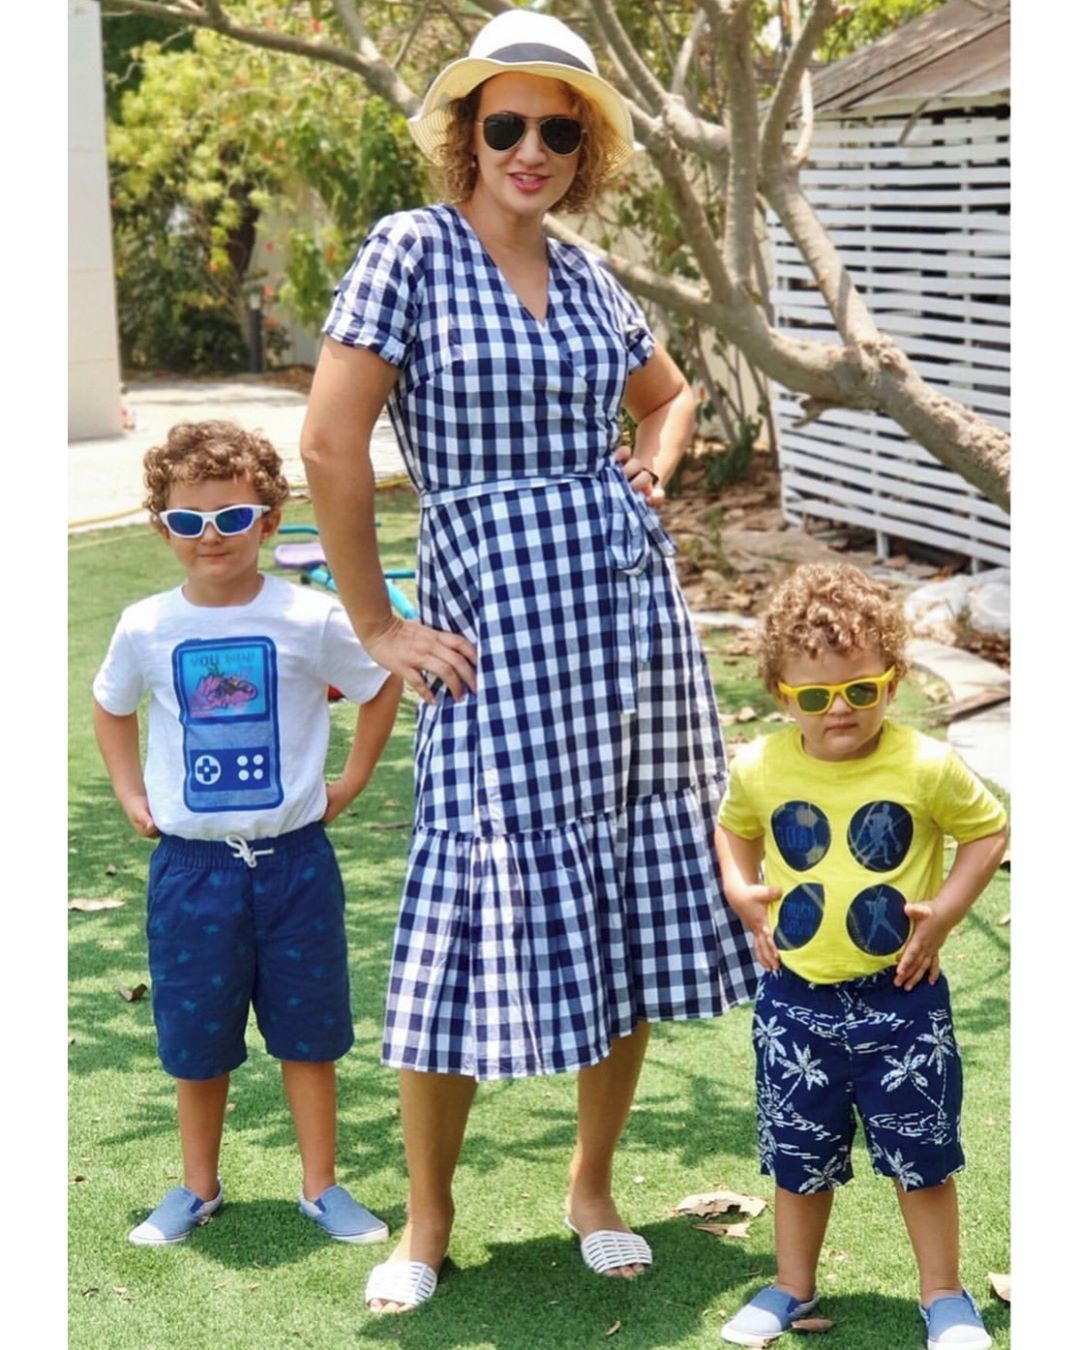 Gap Middle East - We love how @dinabutti styled her Gap Summer outfit and her little ones comfy tees and shorts ☀️ Tag us in your #GapFromHome family snaps for a chance to get featured on our channel!